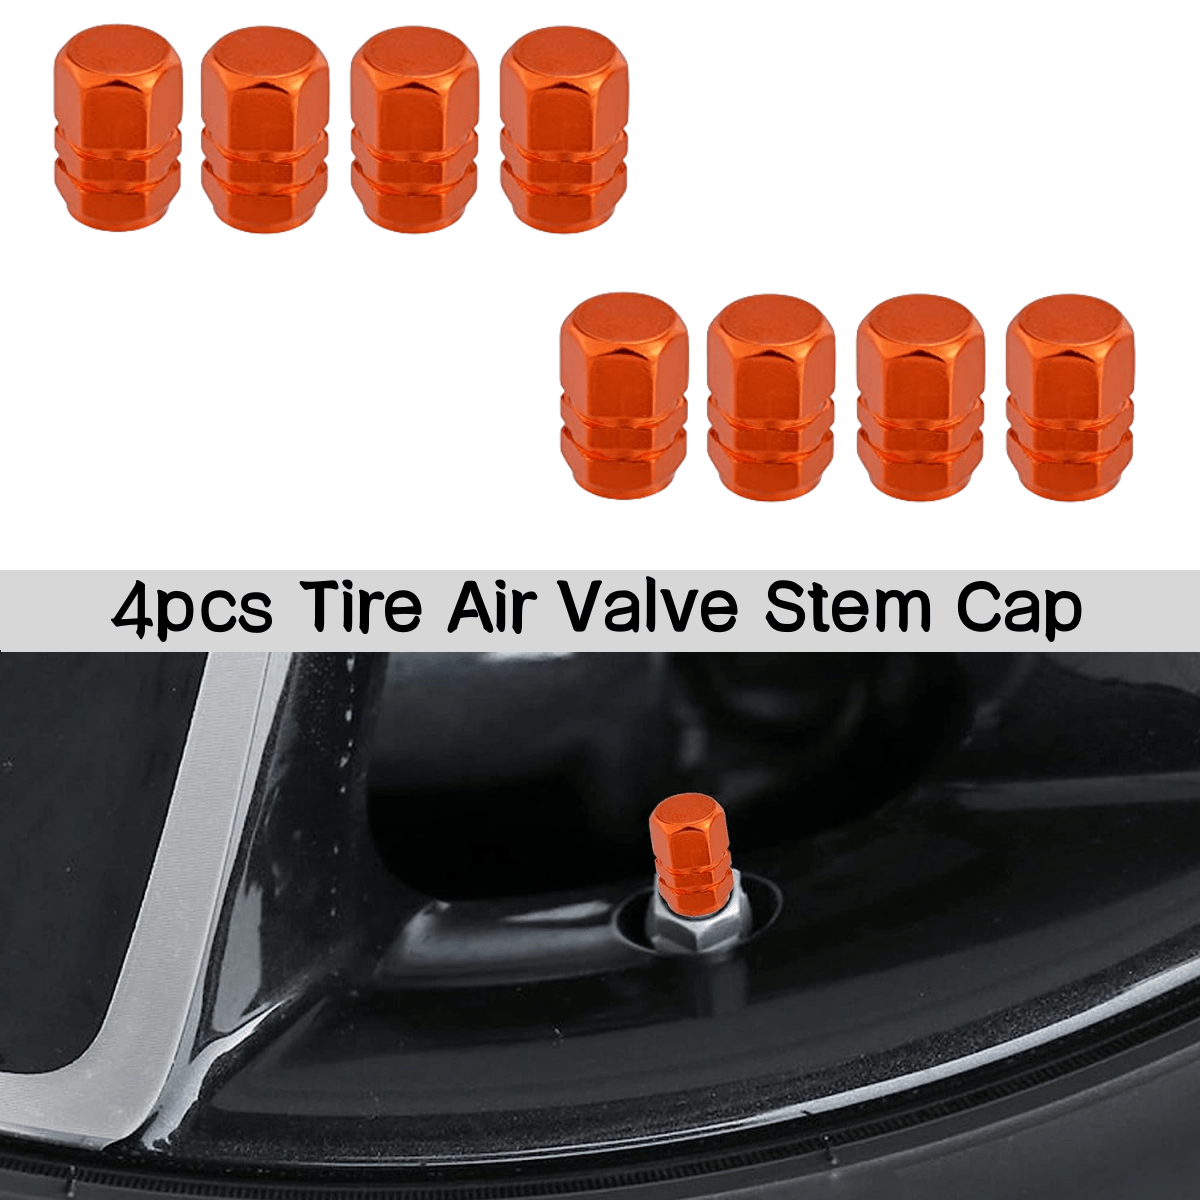 40 Cal Bullet Shell Casing Tire Valve Stem Caps | Tire Pressure Caps | Stem  Tires Accessories for Cars, SUVs, BMX Bike, Bicycle, Truck, Motorcycle 